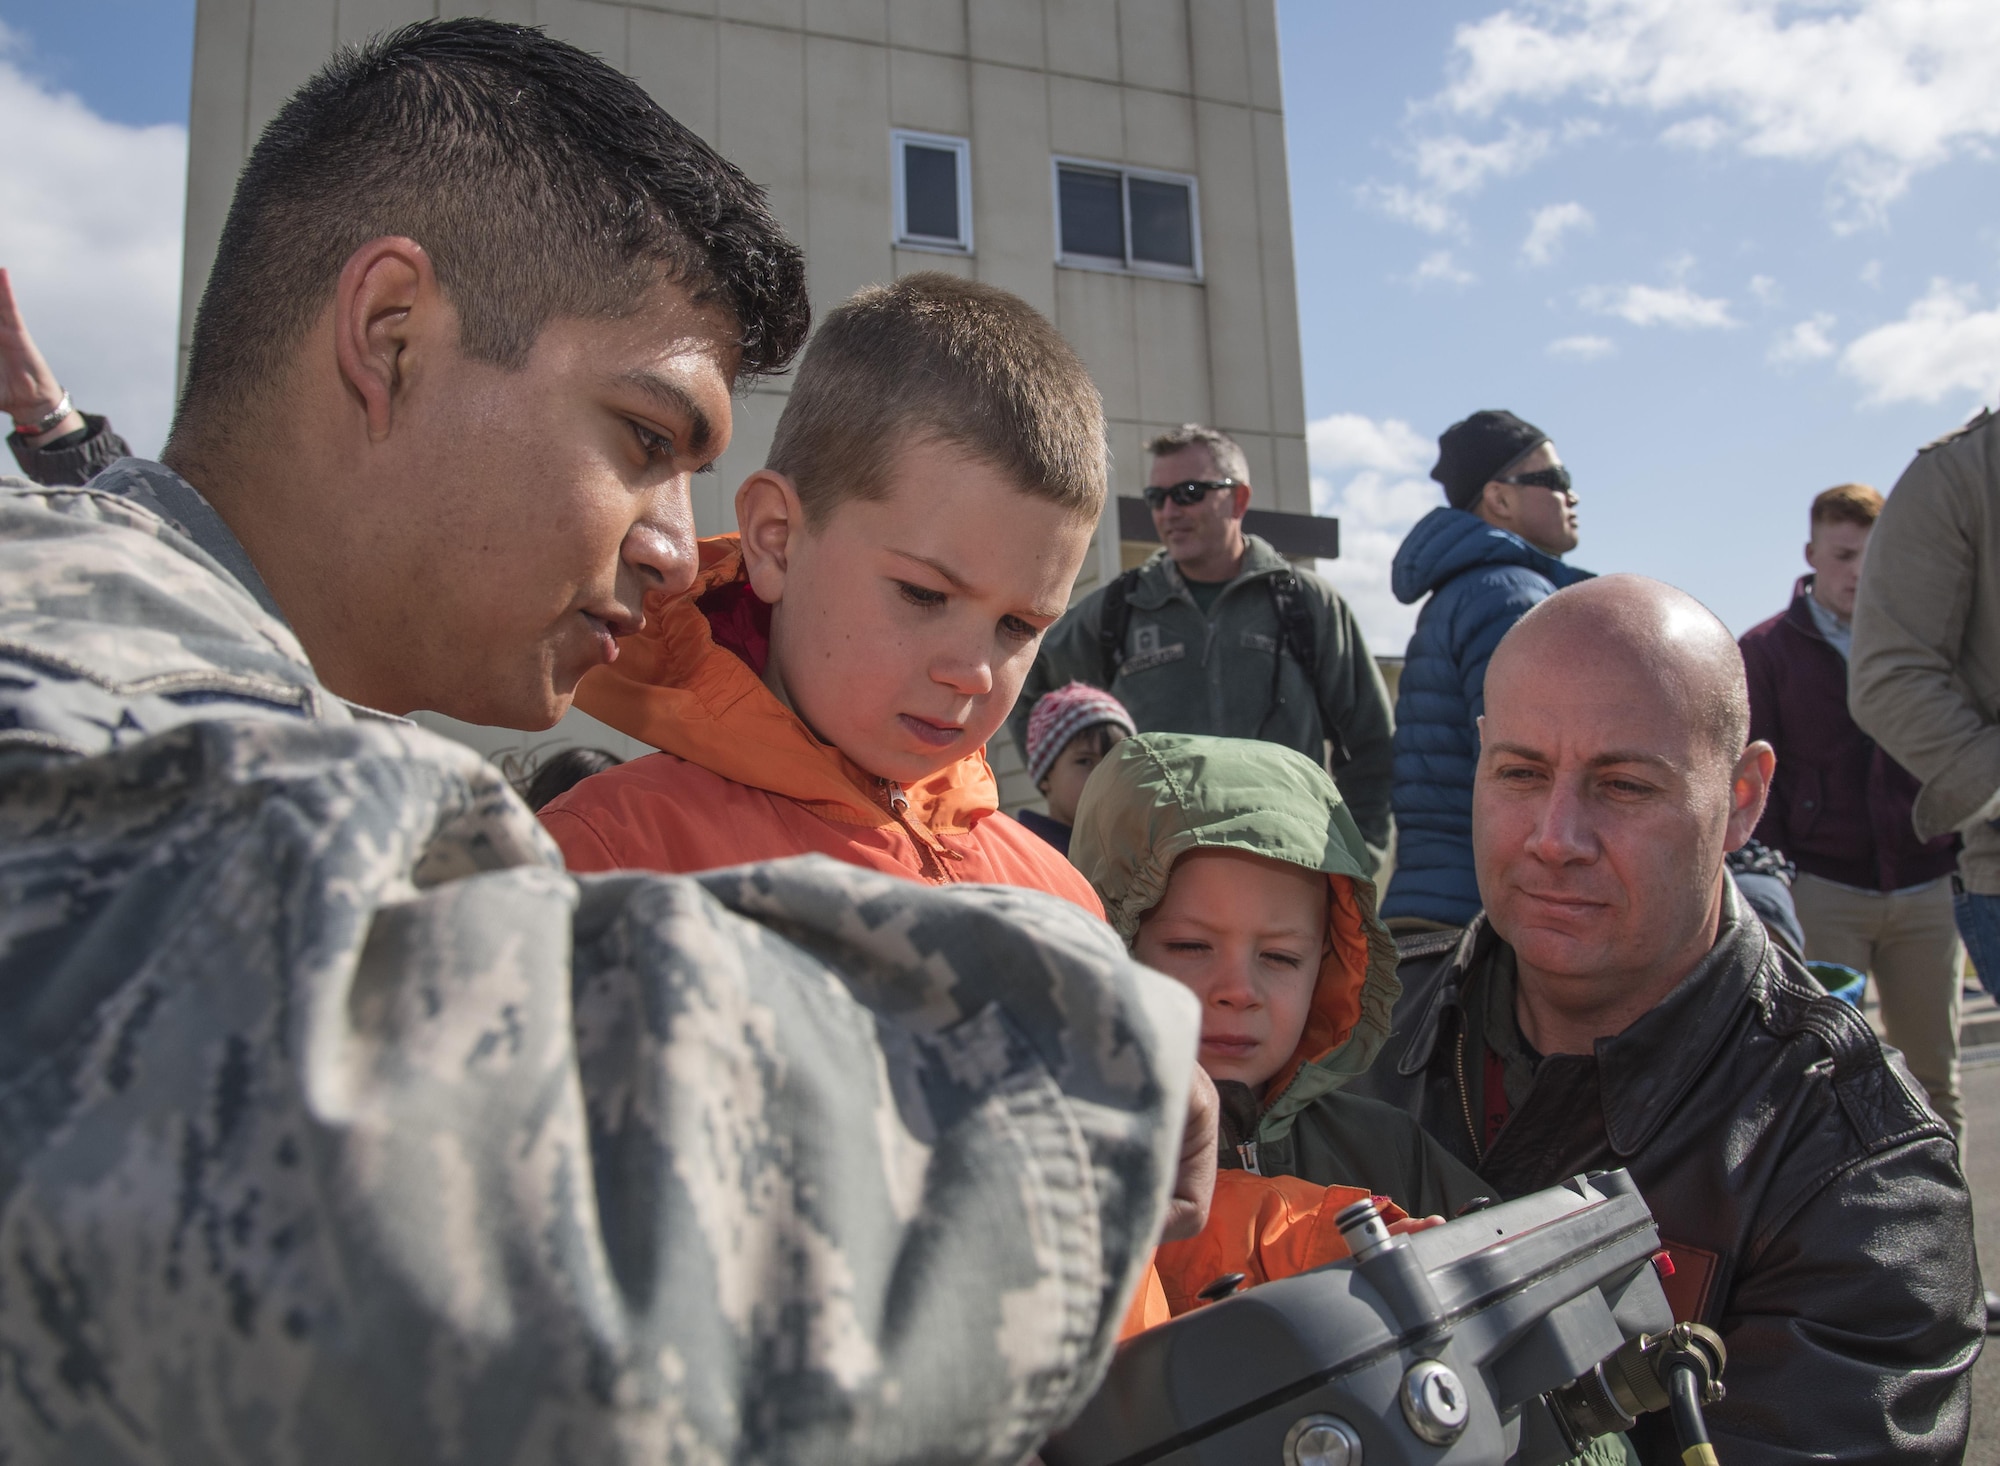 Senior Airman Manuel Carvajo,left, a 35th Civil Engineer Squadron explosive ordnance disposal technician, shows Isaac, center left, and Sam Tolk, center right, both sons of Maj. David Tolk, right, a 13th Fighter Squadron pilot, how to operate a remote control to an EOD reconnaissance devide during a Range Day event at Misawa Air Base, Japan, Oct. 21, 2016. Various shops, including weather, aircrew flight equipment and security forces, displayed tools used to accomplish the mission. (U.S. Air Force photo by Airman 1st Class Sadie Colbert)